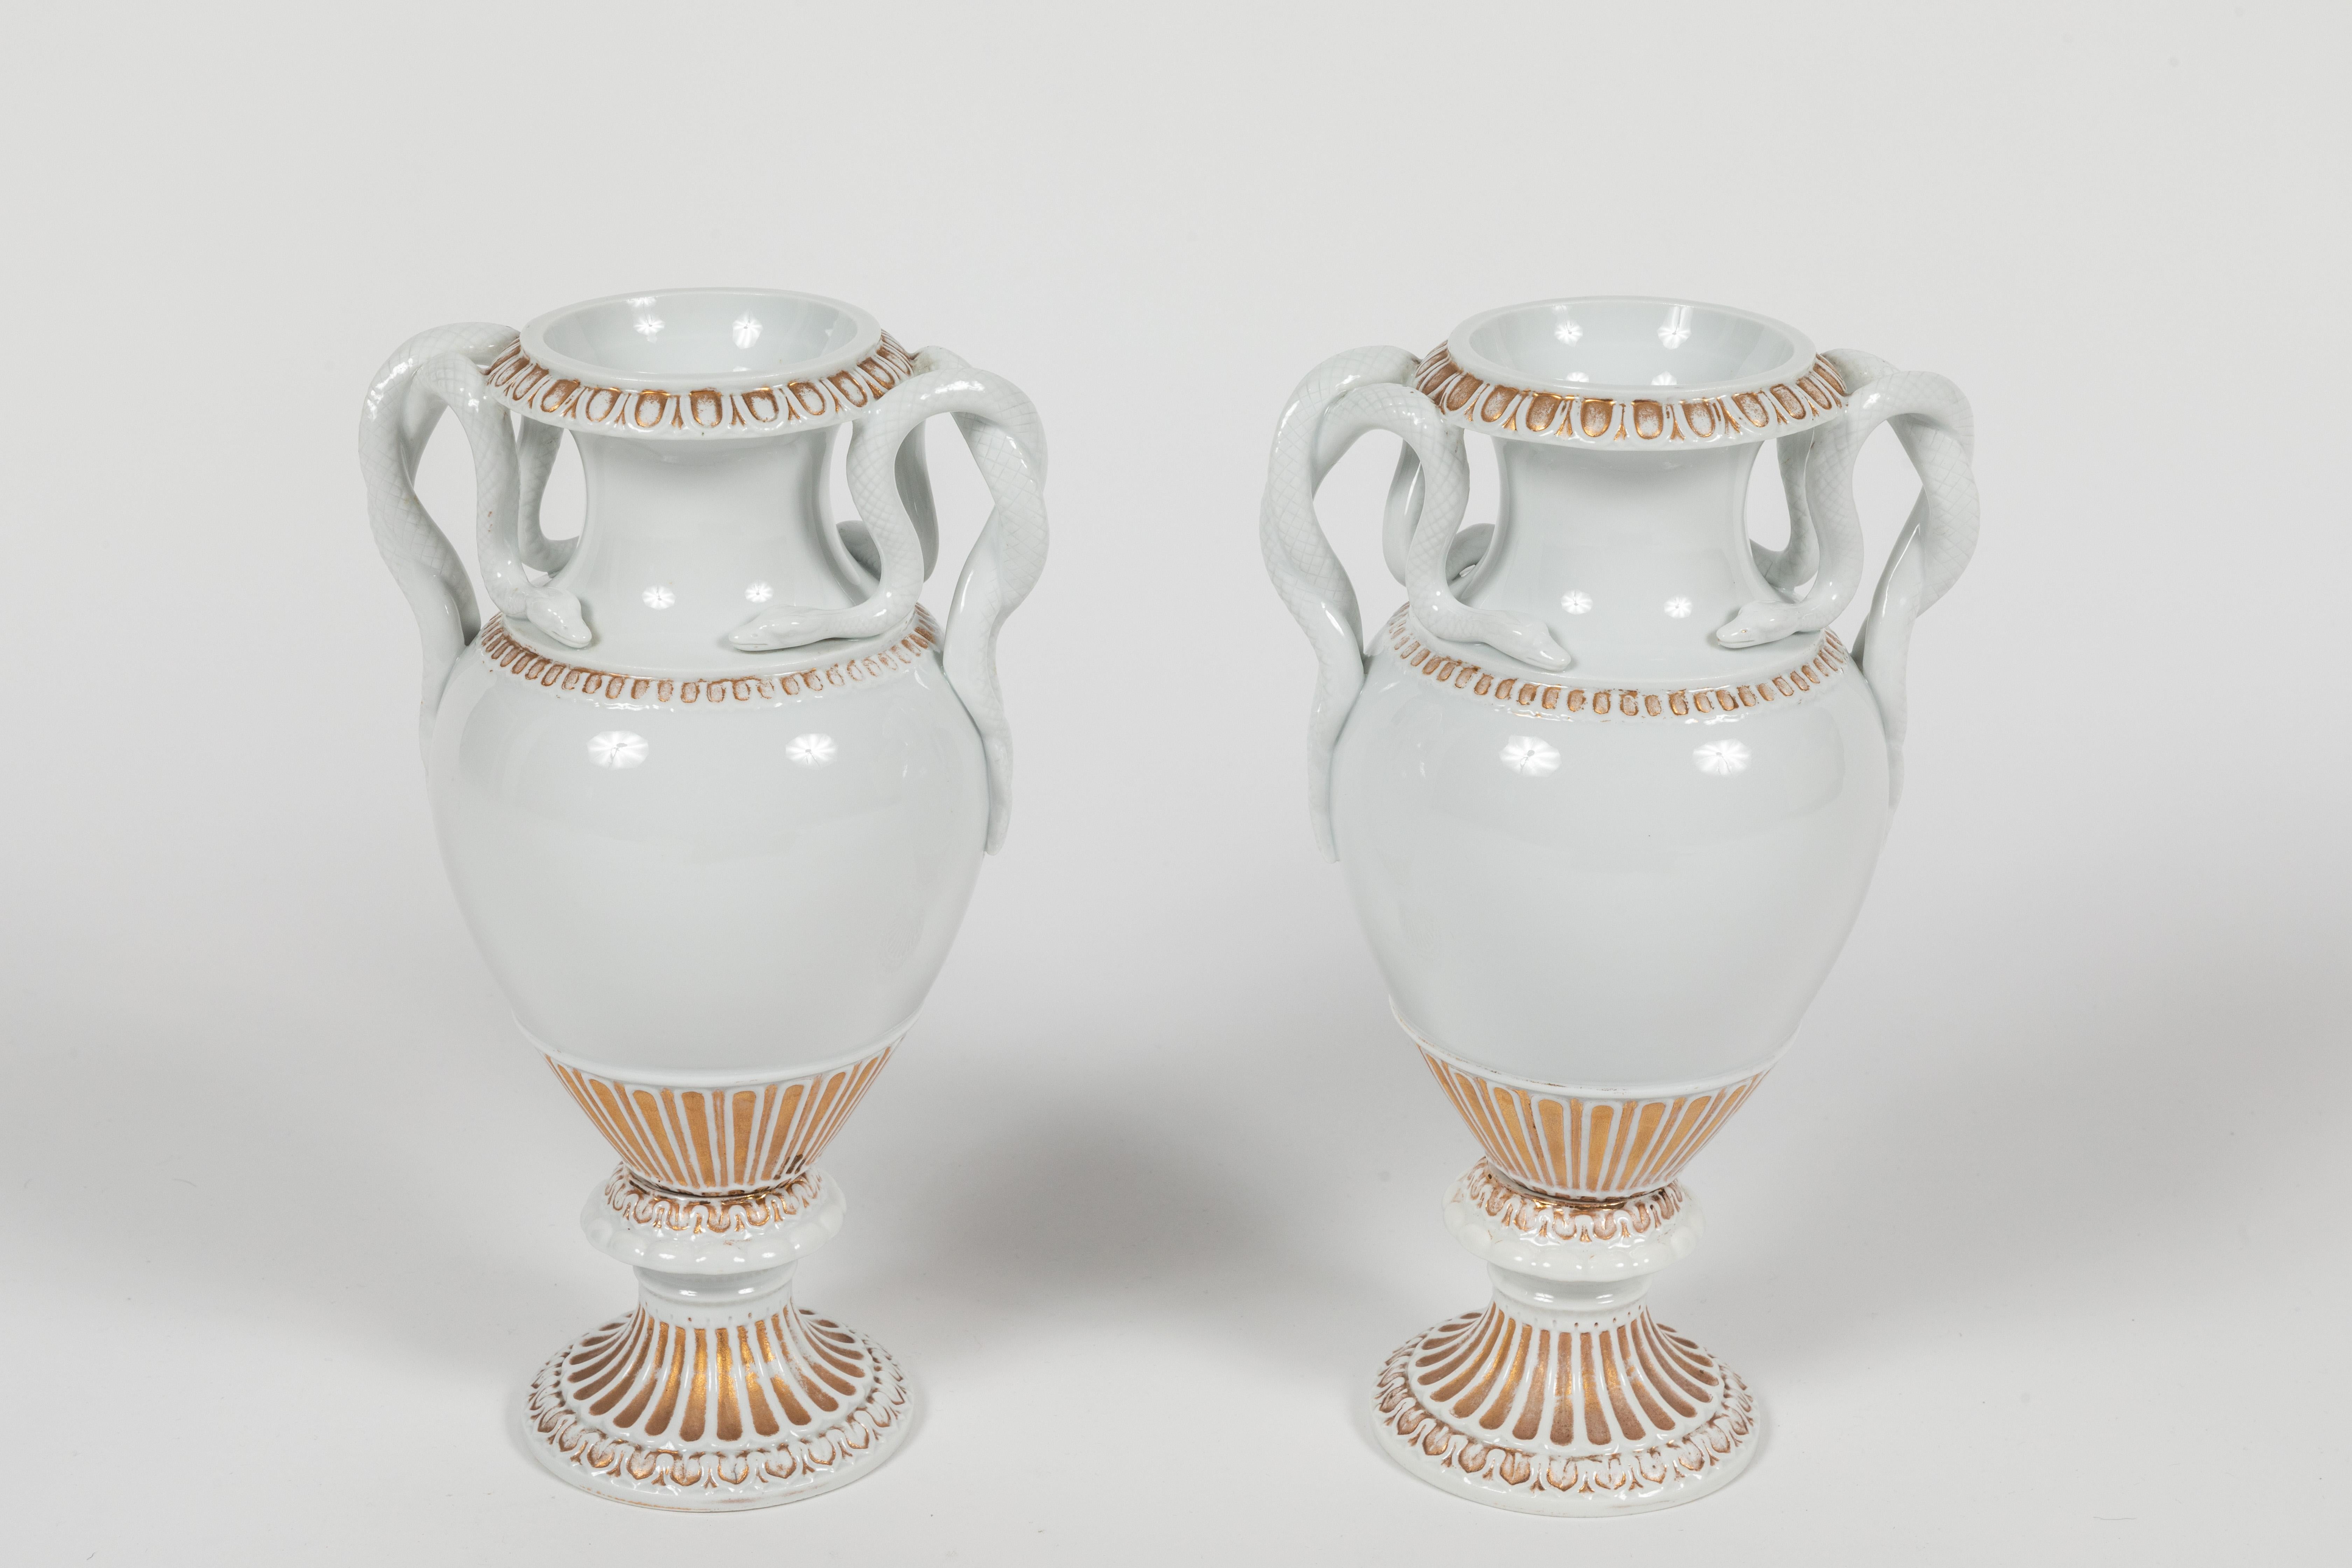 Stylish and chic pair of Meissen urns in Classic glazed white porcelain with gold accents. These urns are classical in form and feature entwined snakes as handles. A timeless design that works well in both Classic and contemporary interiors. The